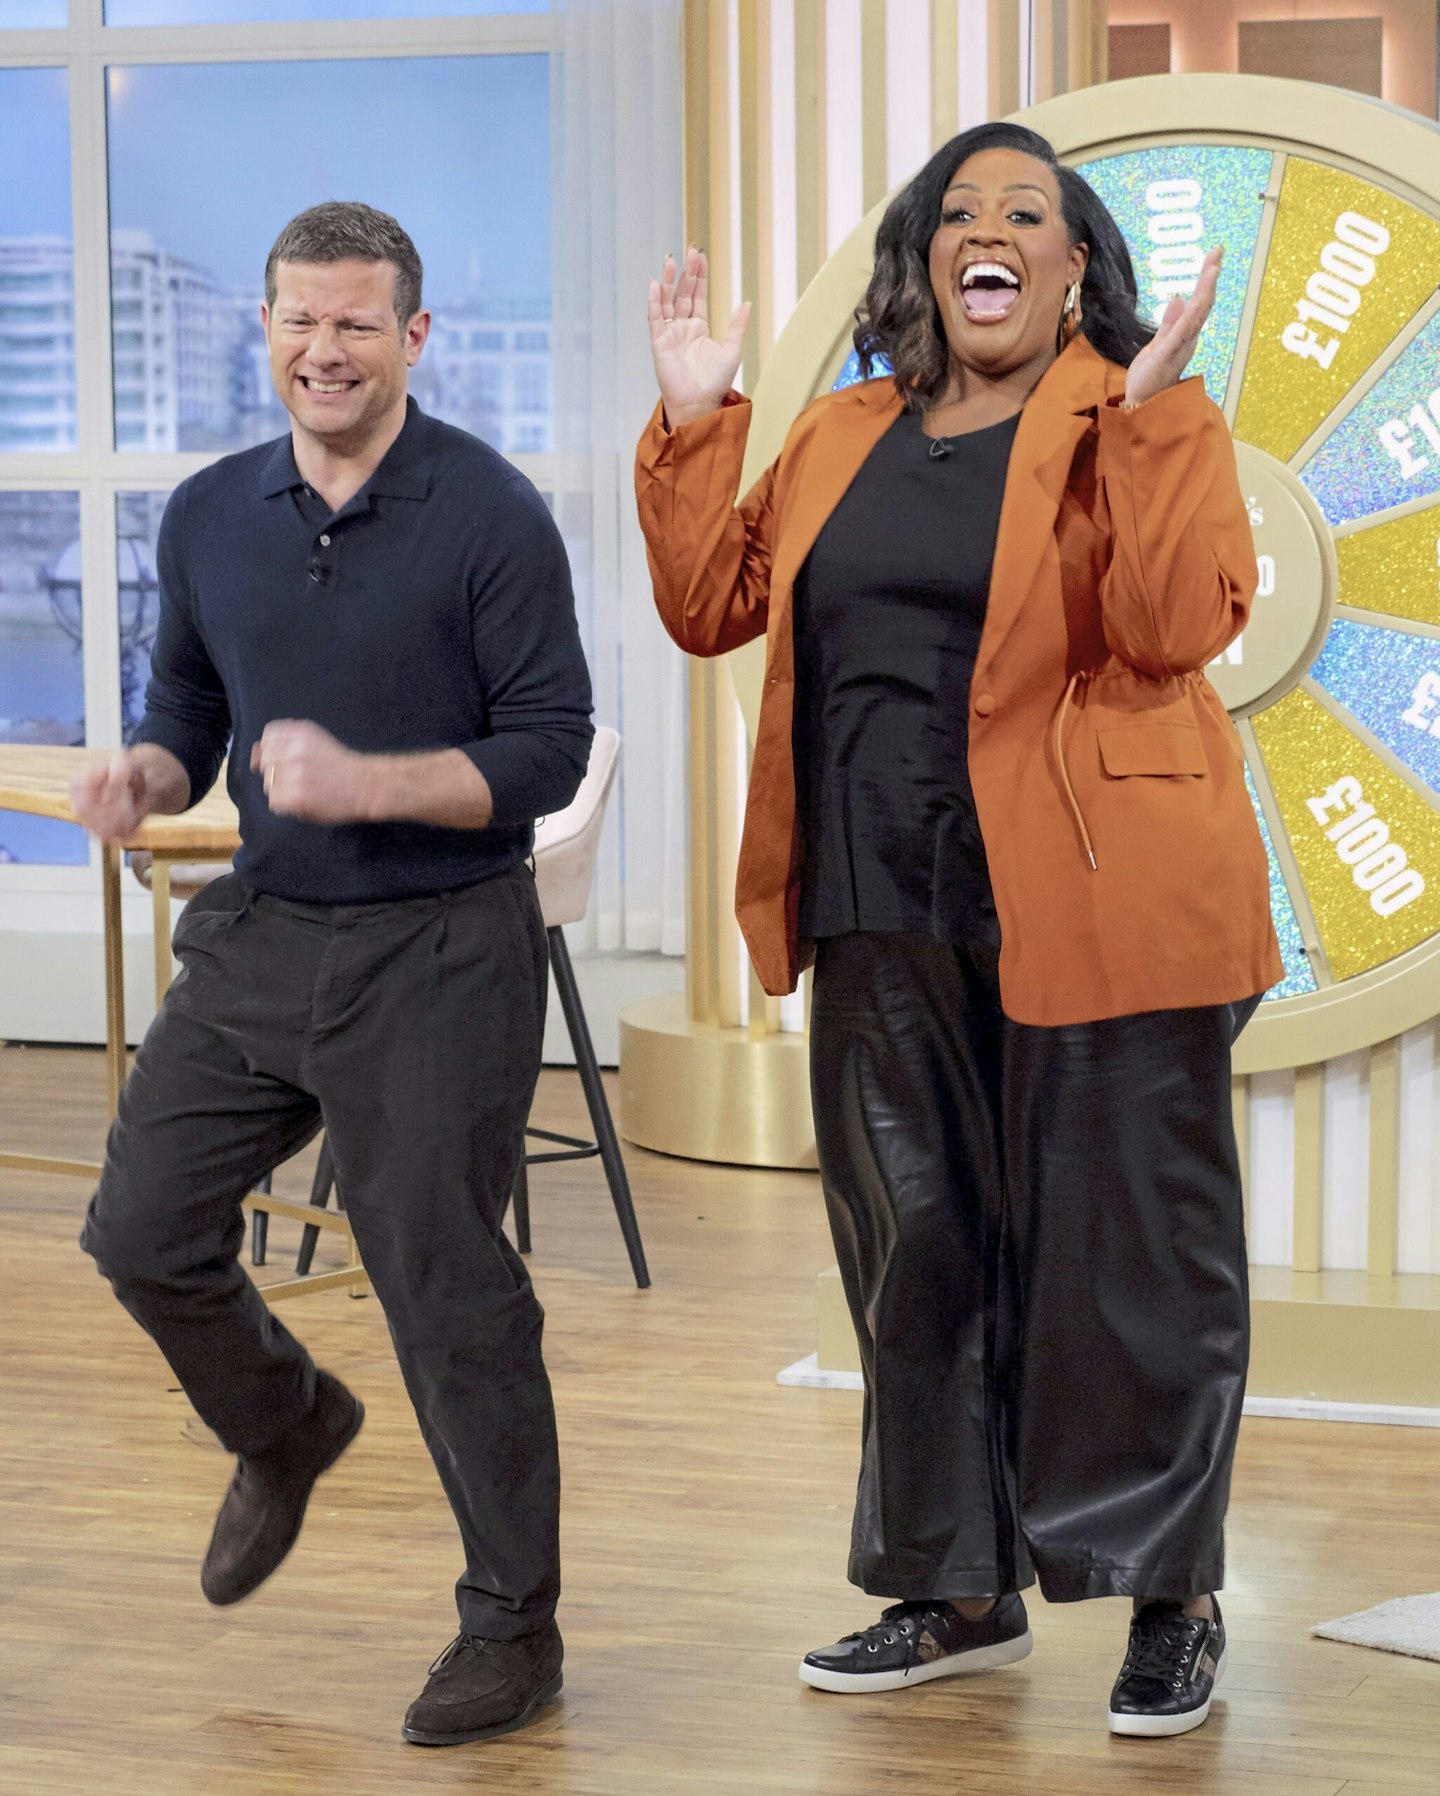 alison hammond and dermot o'leary